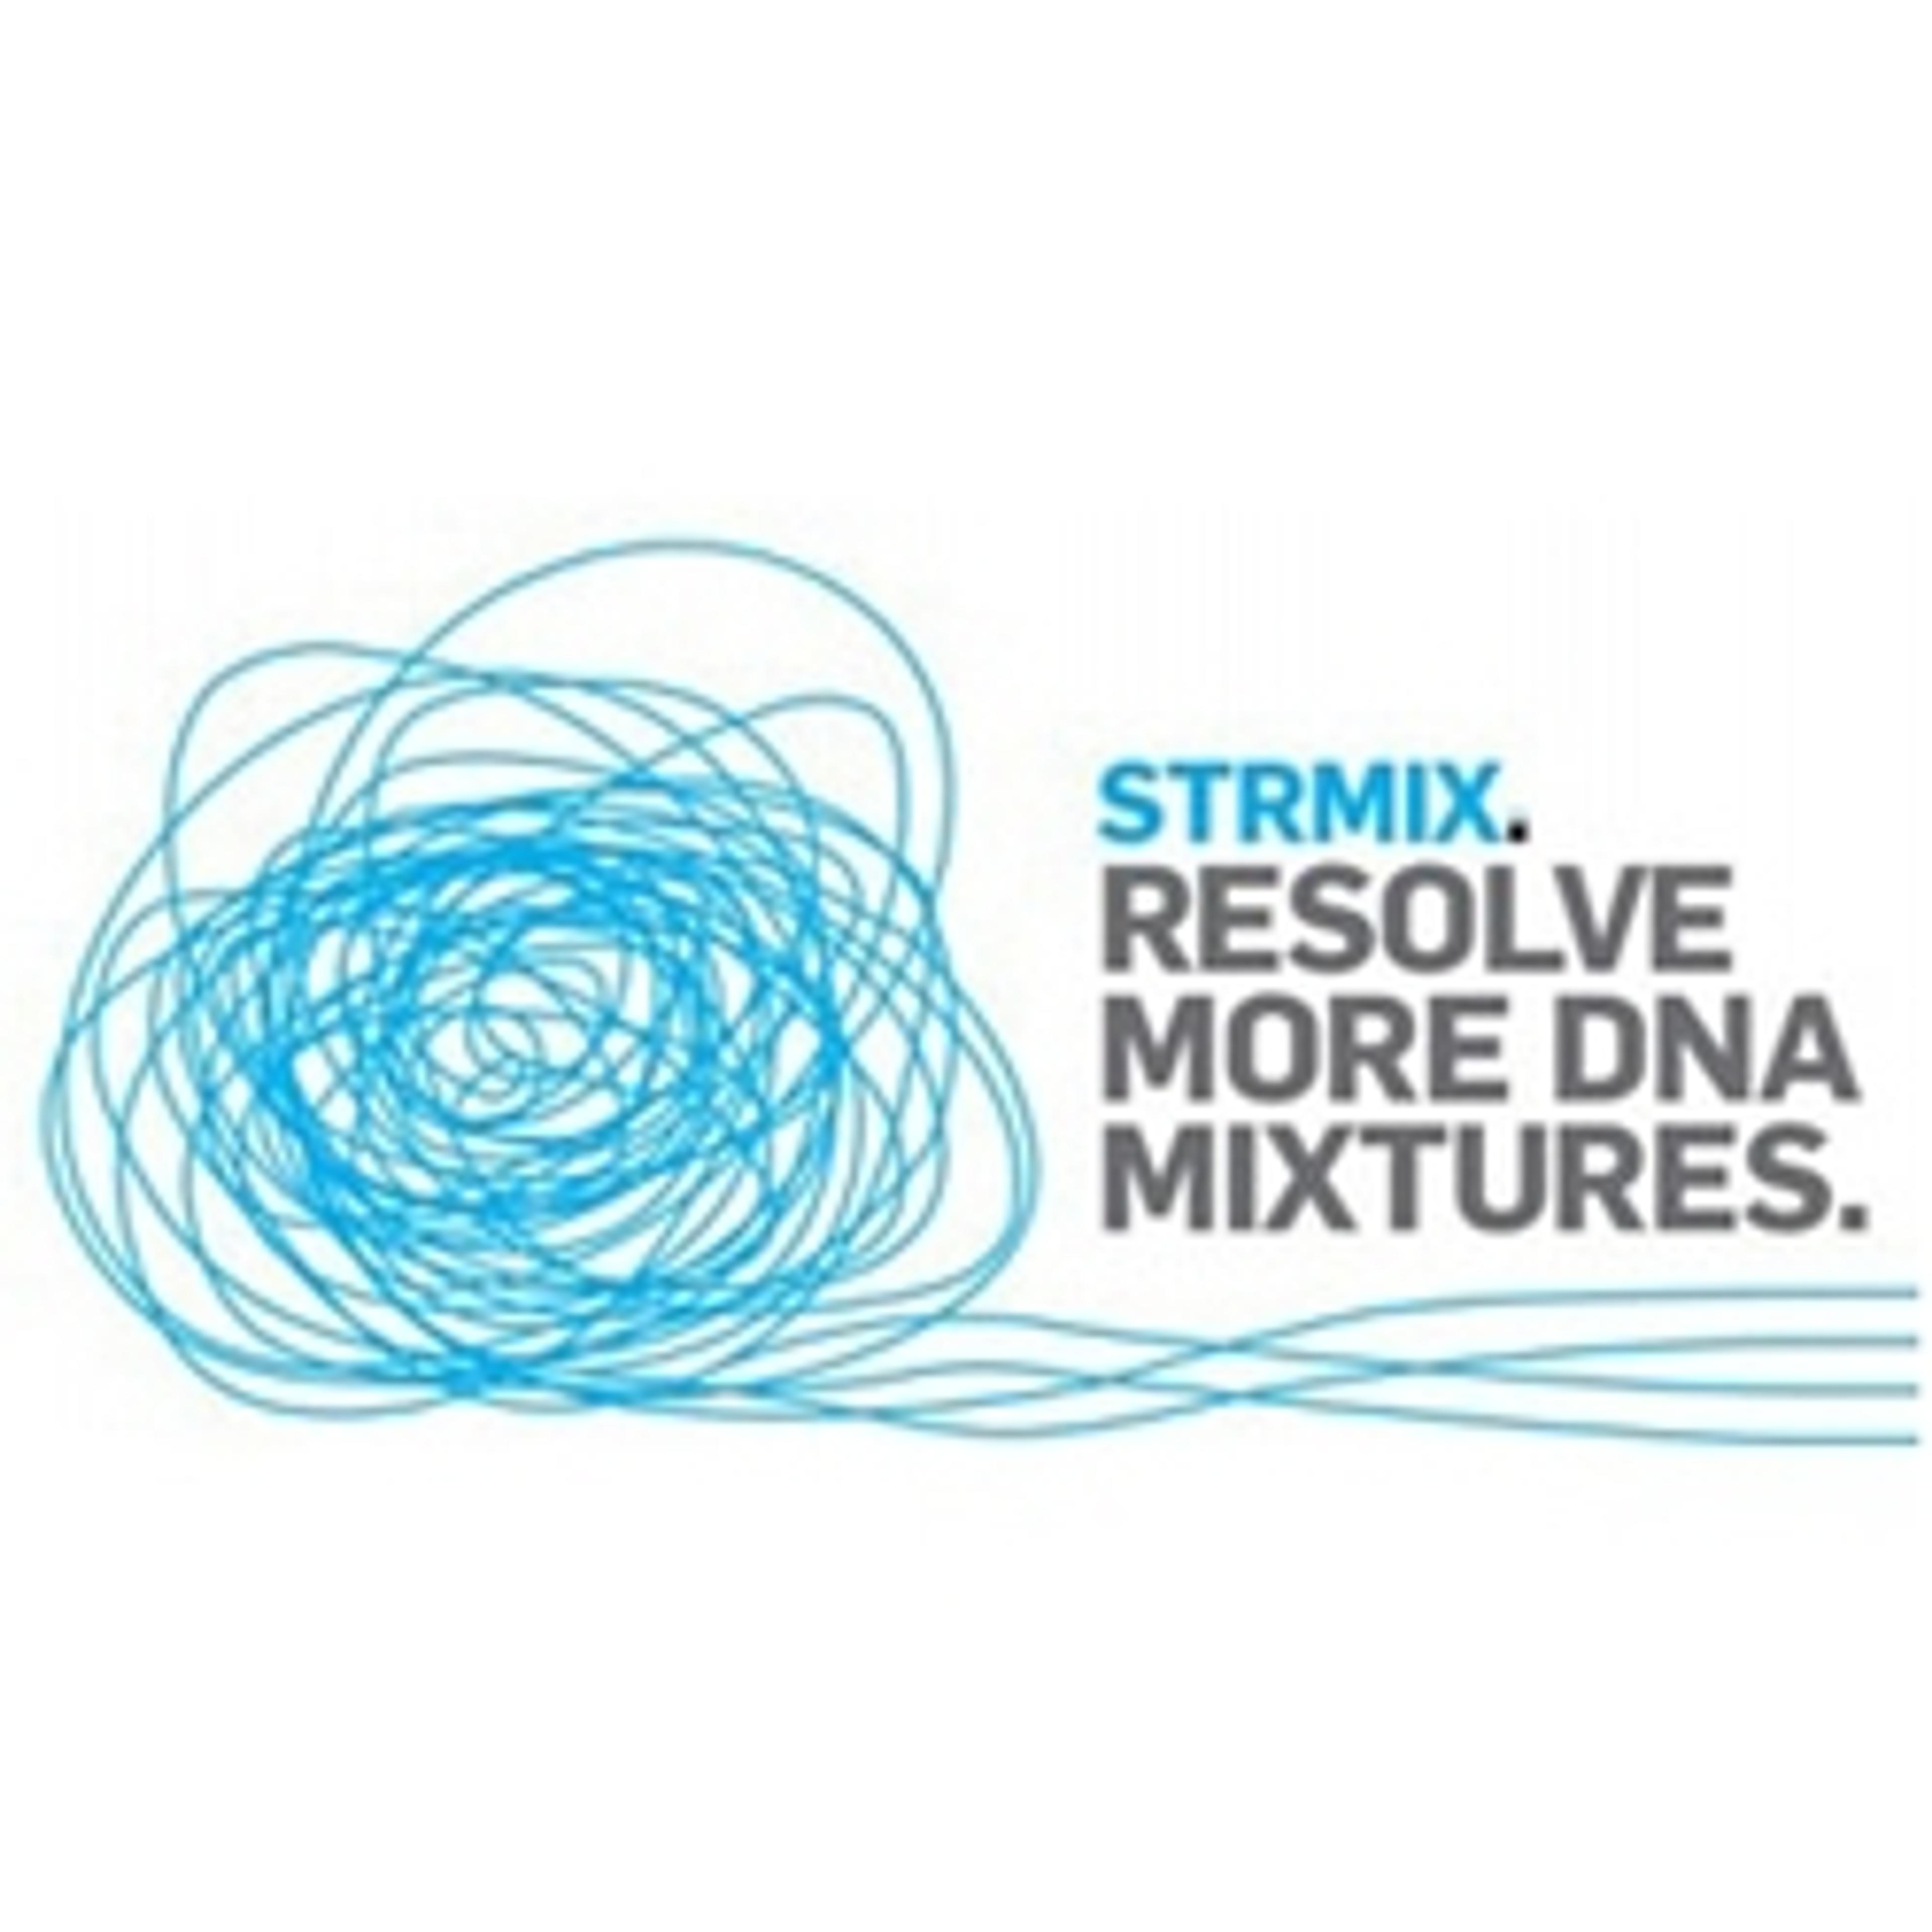 STRmix forensic software